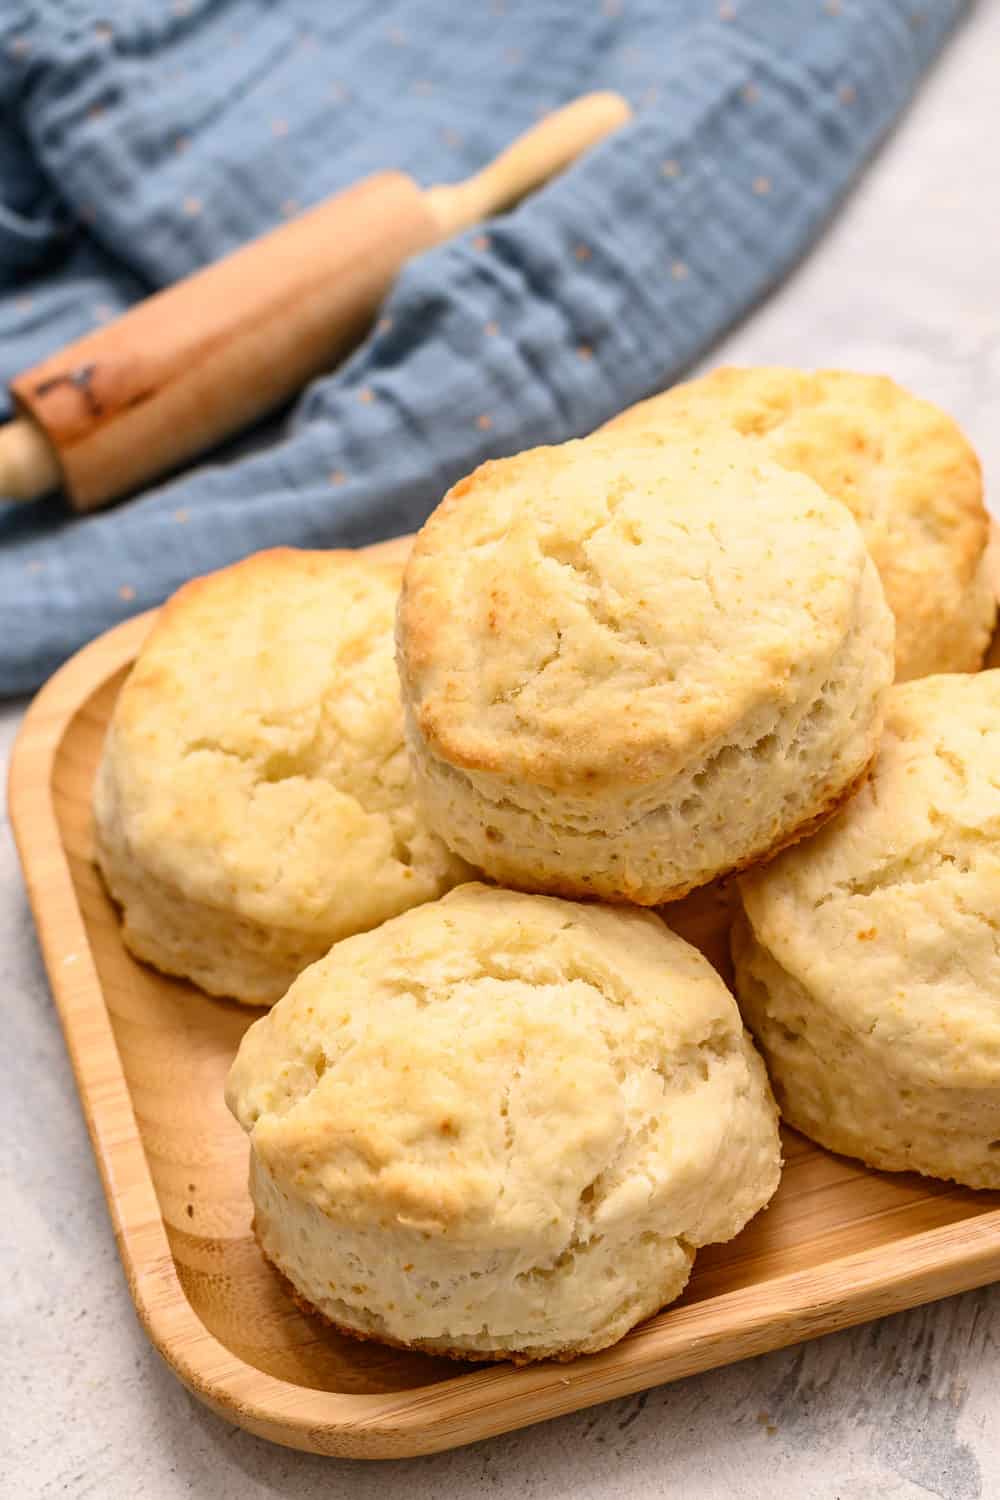 https://therecipecritic.com/wp-content/uploads/2012/08/7upbiscuits3-scaled.jpg